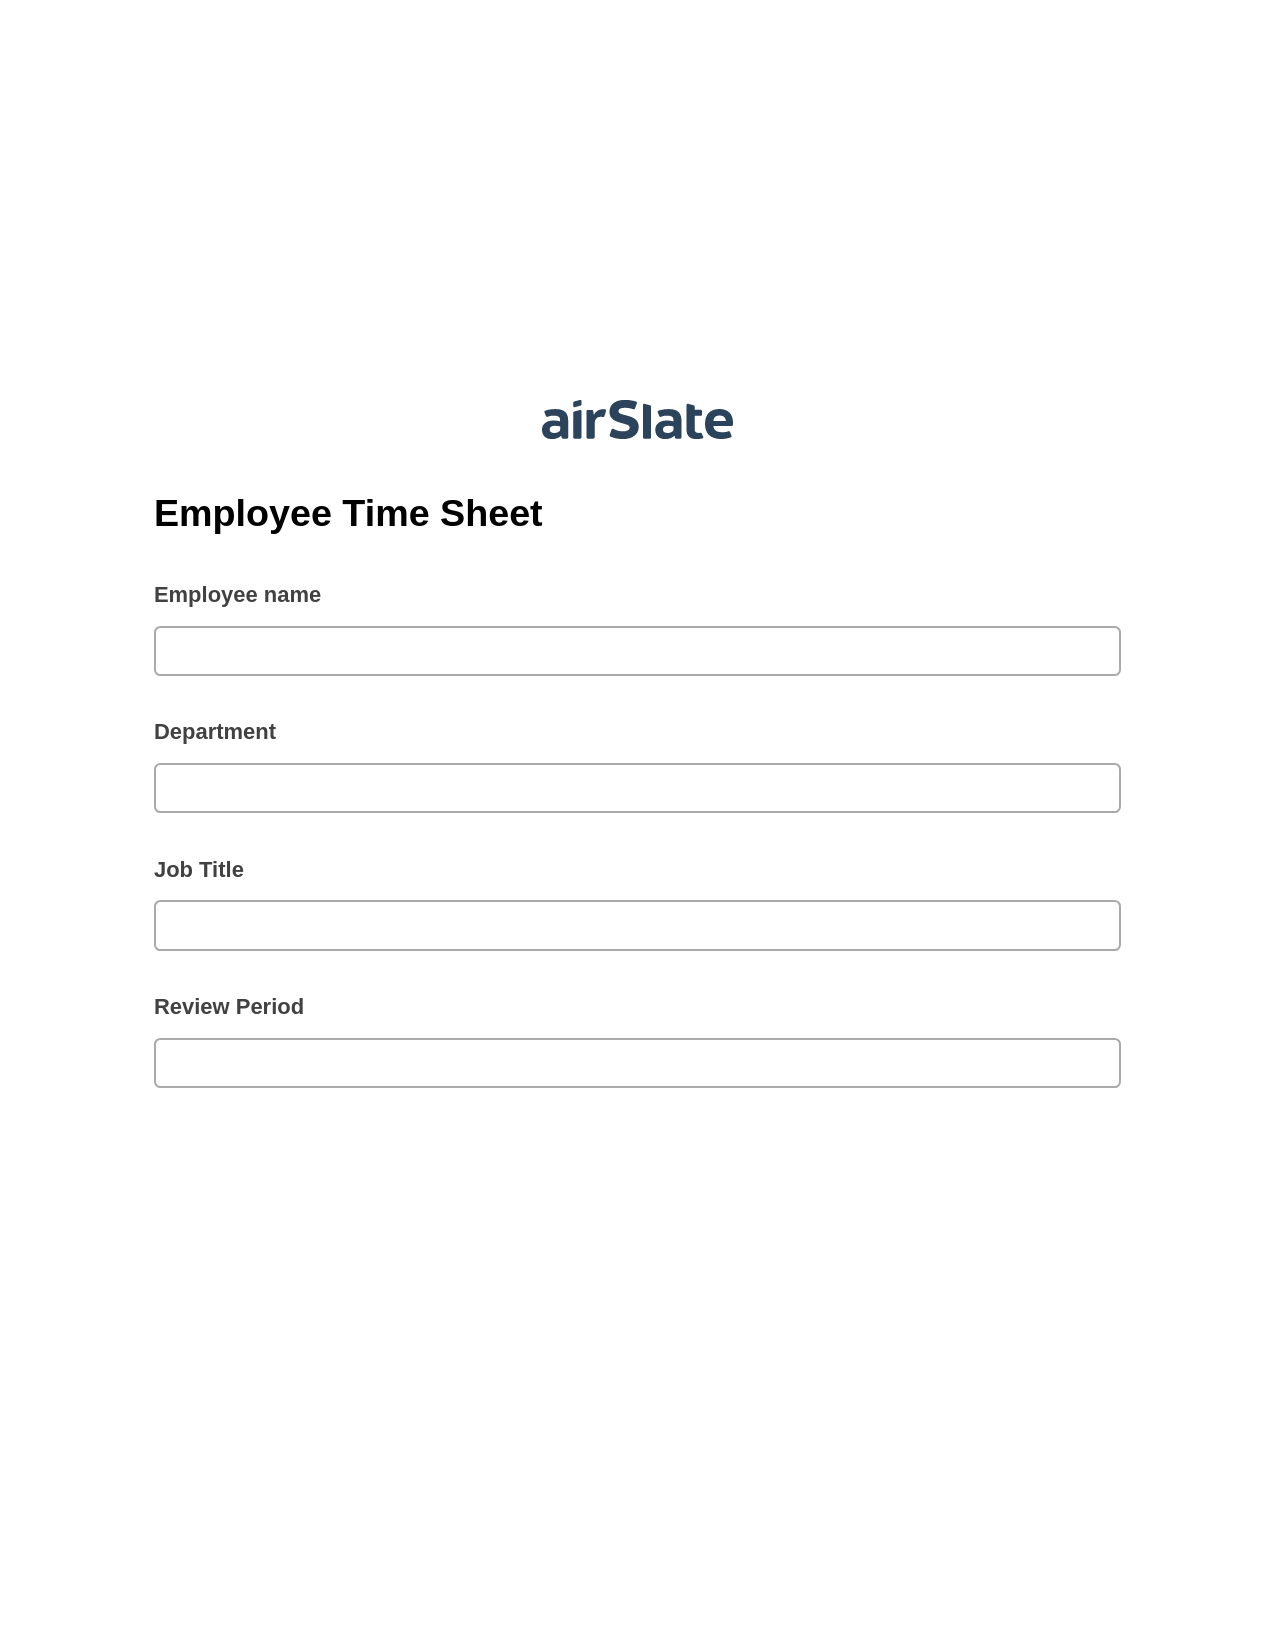 Employee Time Sheet Pre-fill from Litmos bot, Create Salesforce Records Bot, Export to Excel 365 Bot